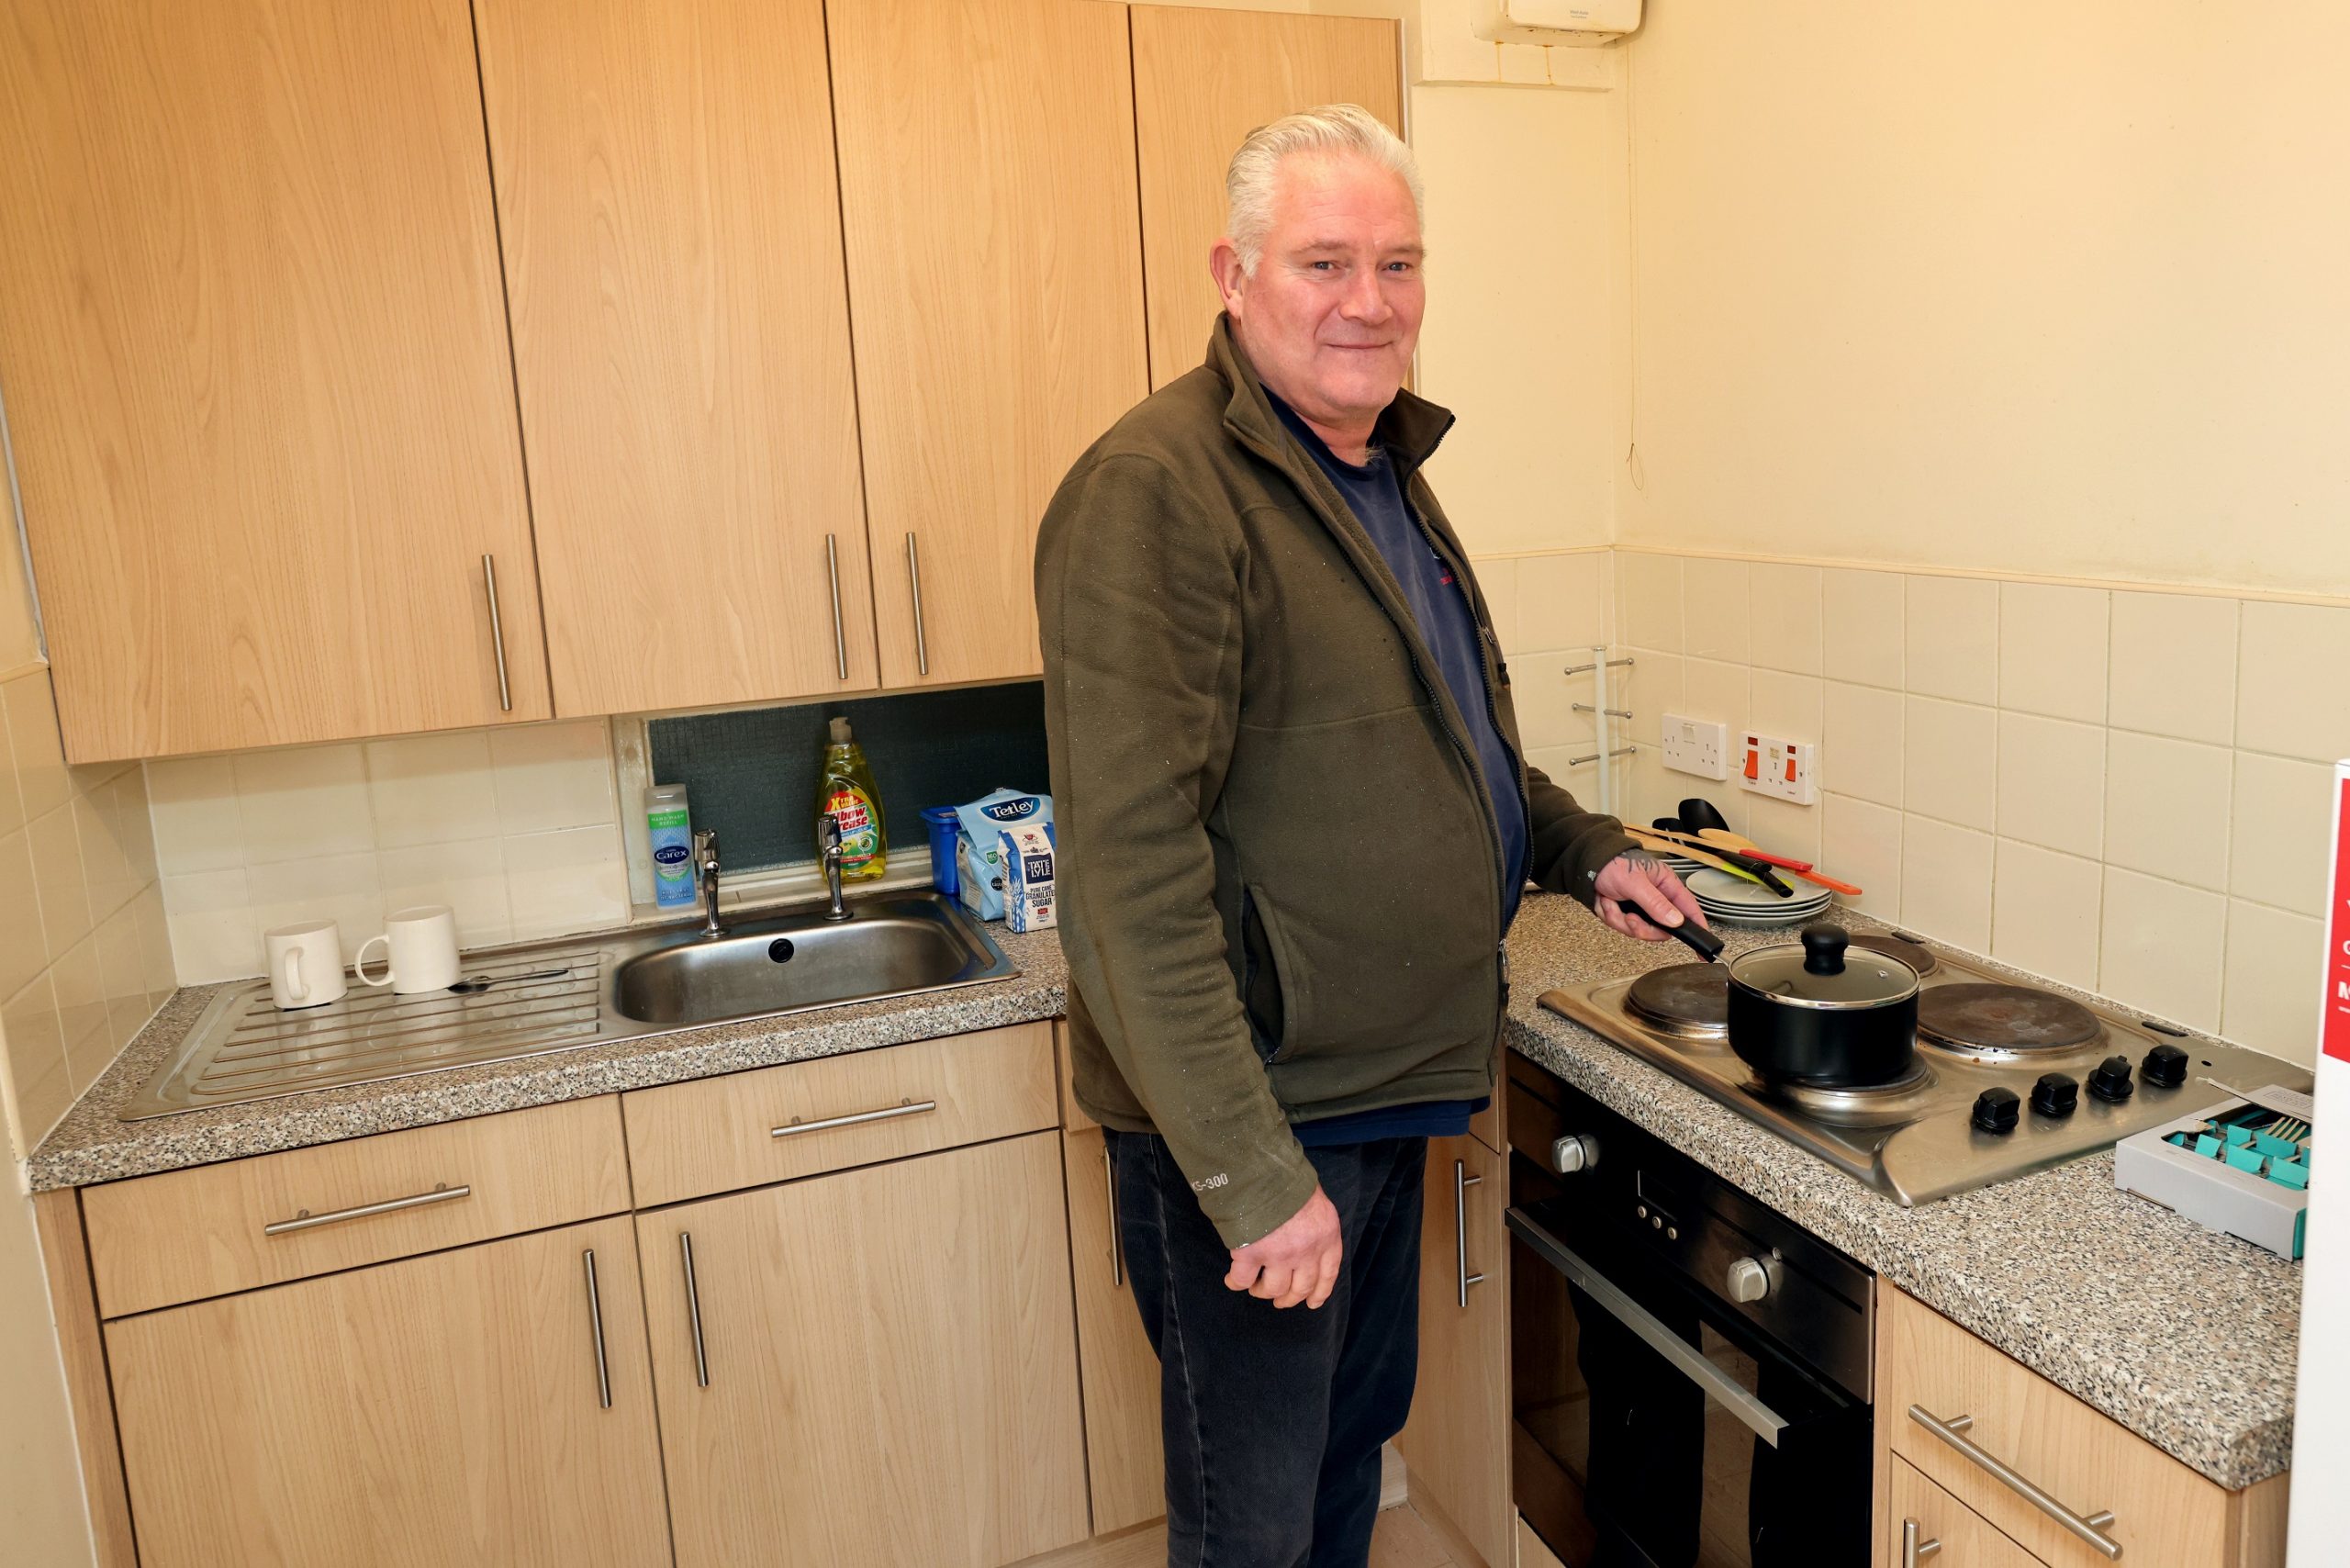 Furnished Flats Provide Welcome Relief To Homeless Veterans